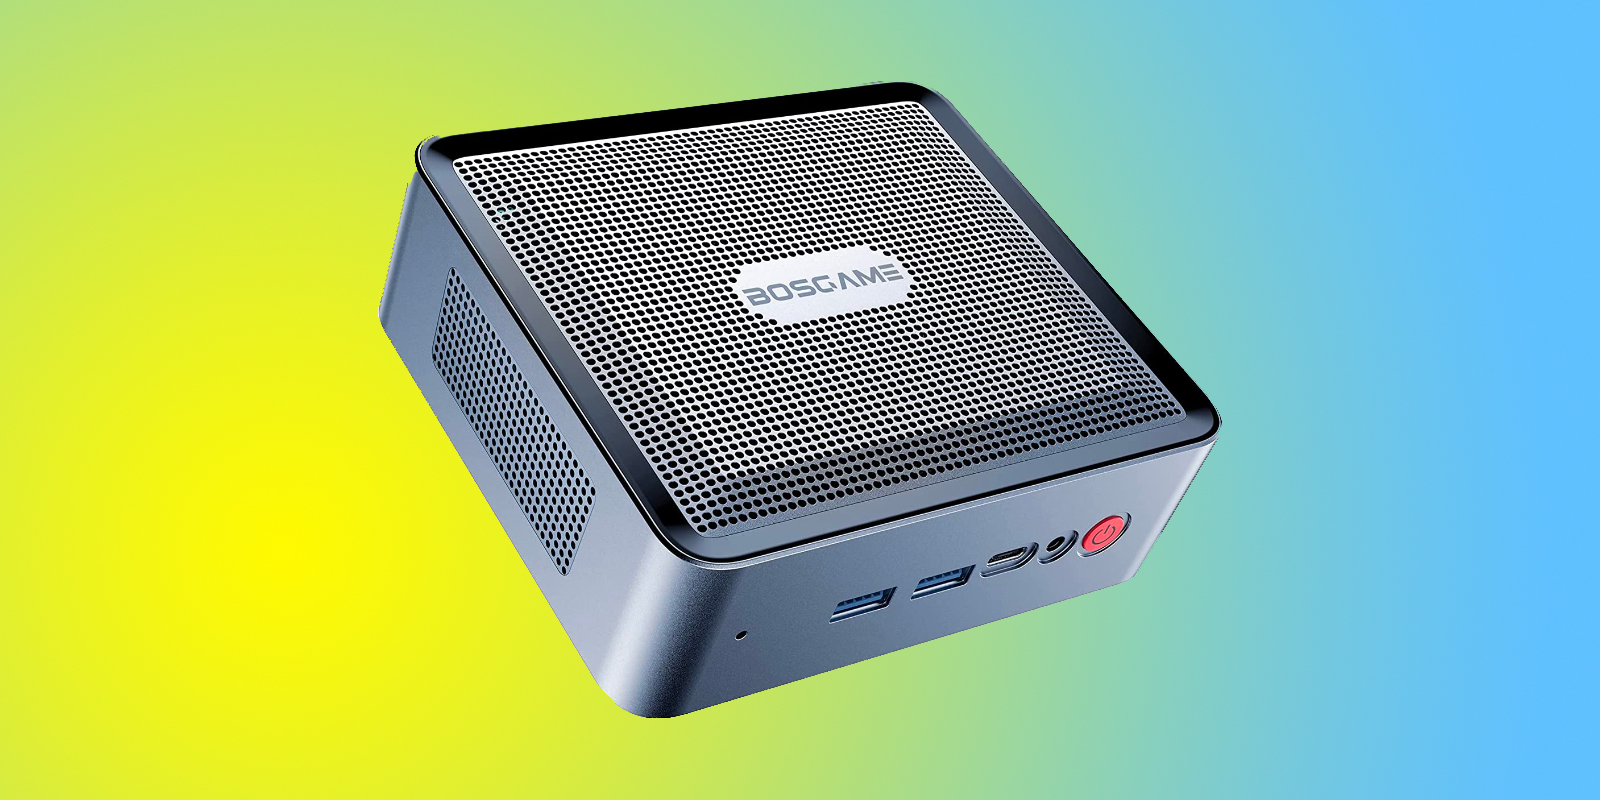 Save $130 on a Bosgame mini PC with this Cyber Monday deal